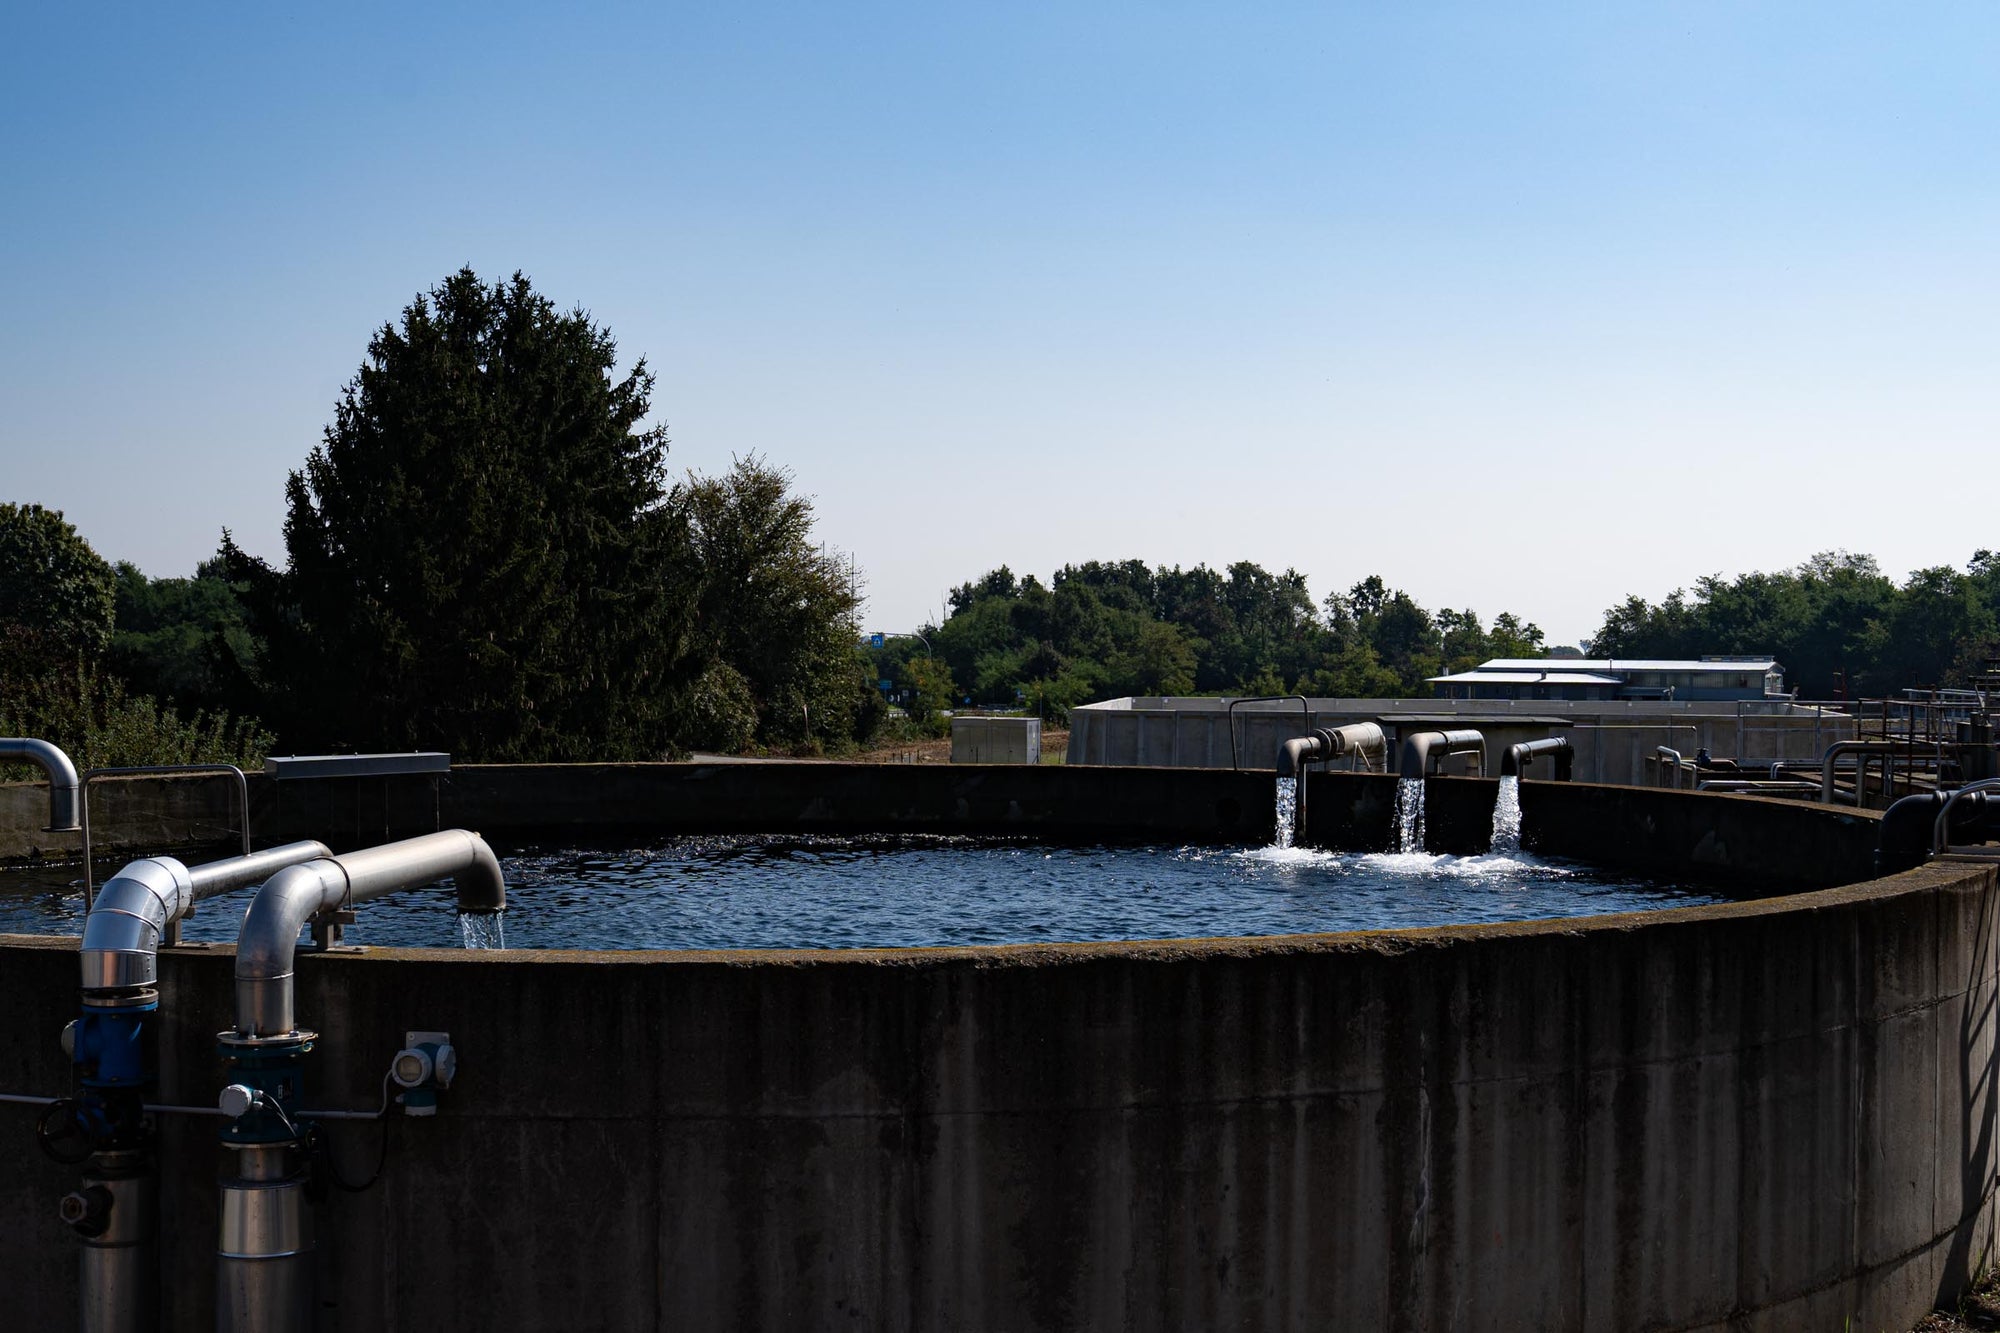  A reservoir of purified water at the Tintoria Ferraris facility.